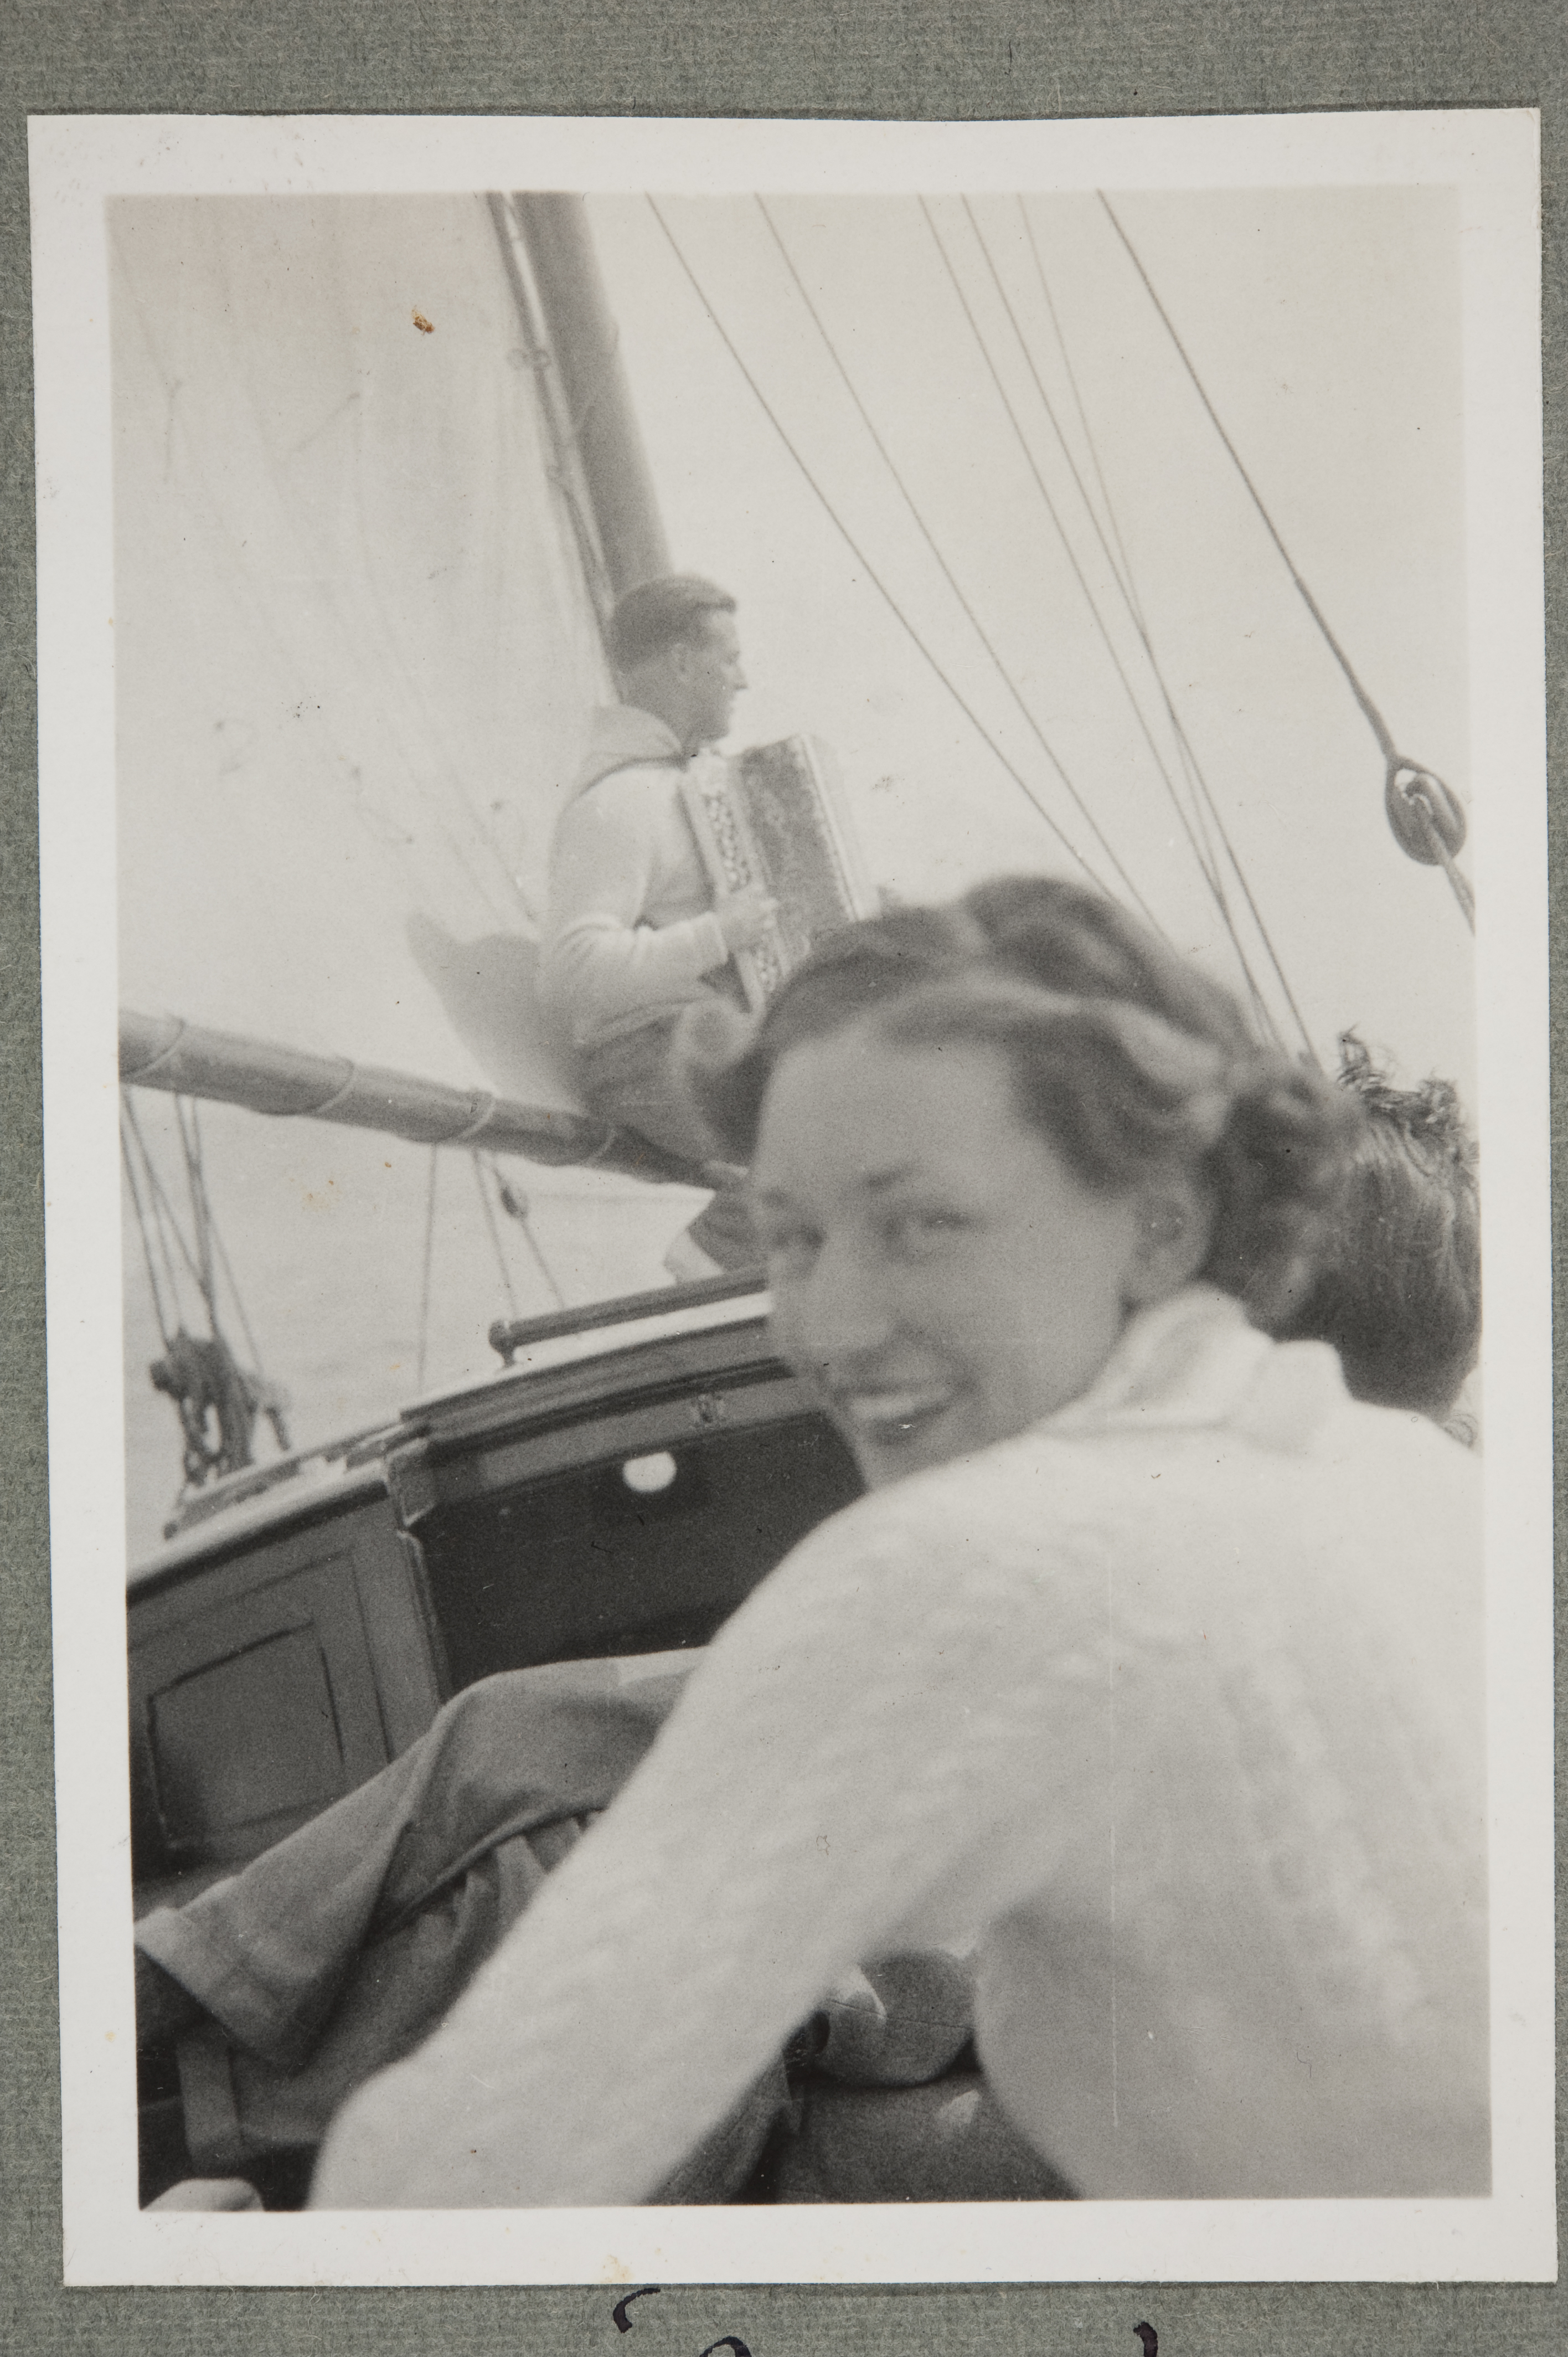 From the family album of Lord David Douglas-Hamilton 1935-1938 (University of St Andrews Photographic Collection)